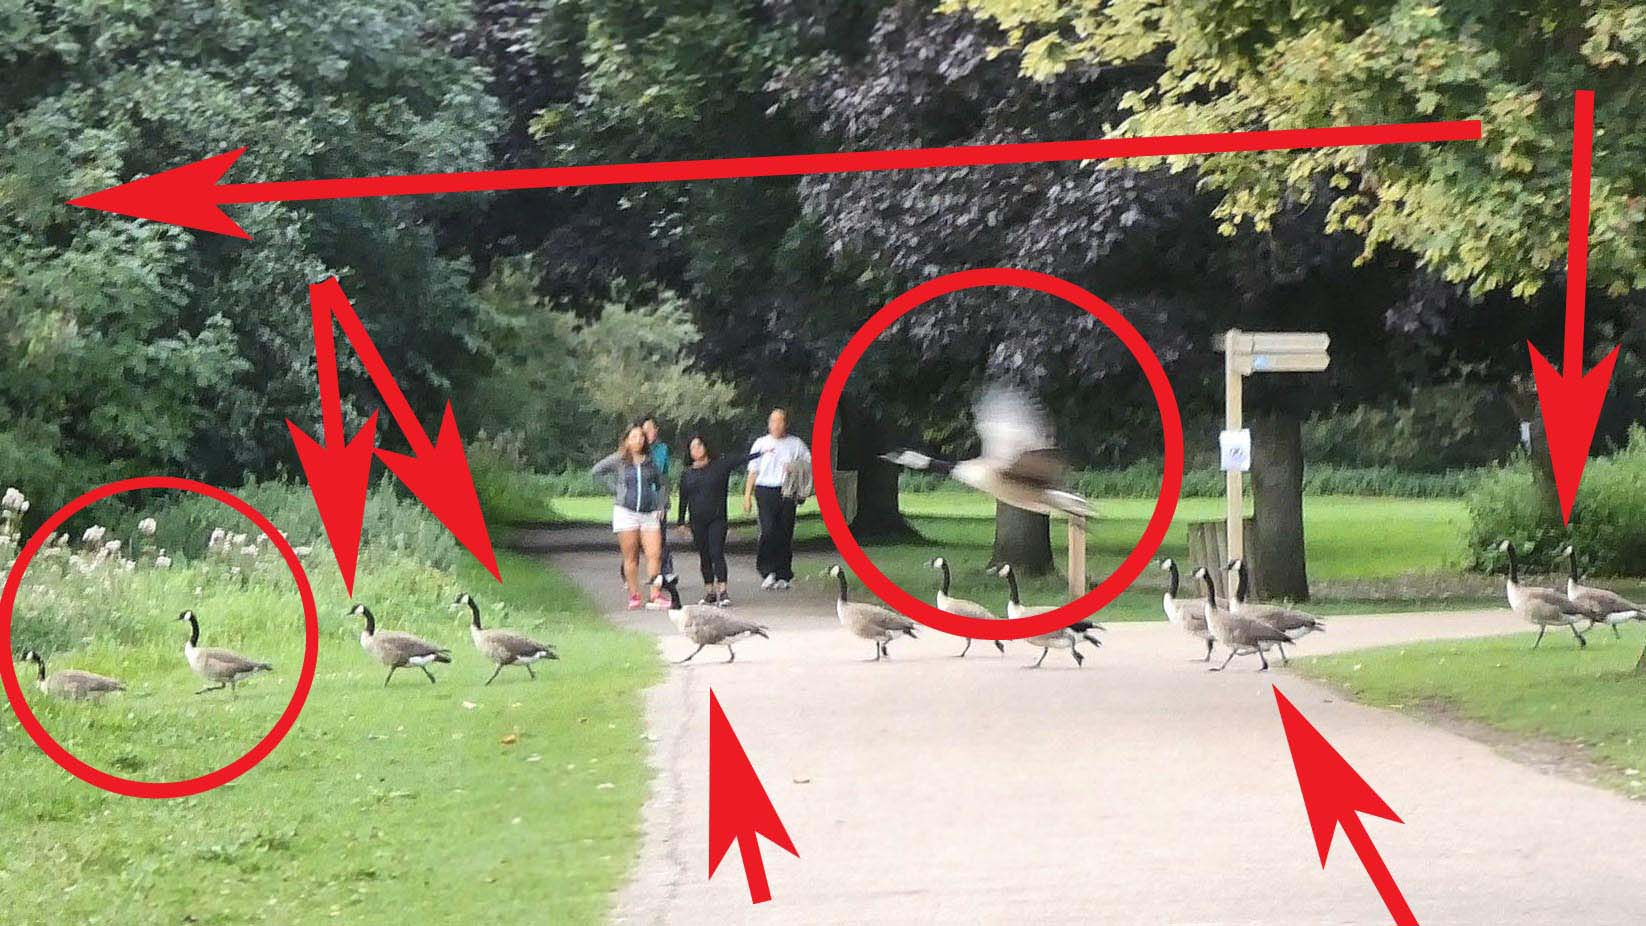 Dogs Spooks Geese Causing them to Run and Fly from the Park with Huge Rat